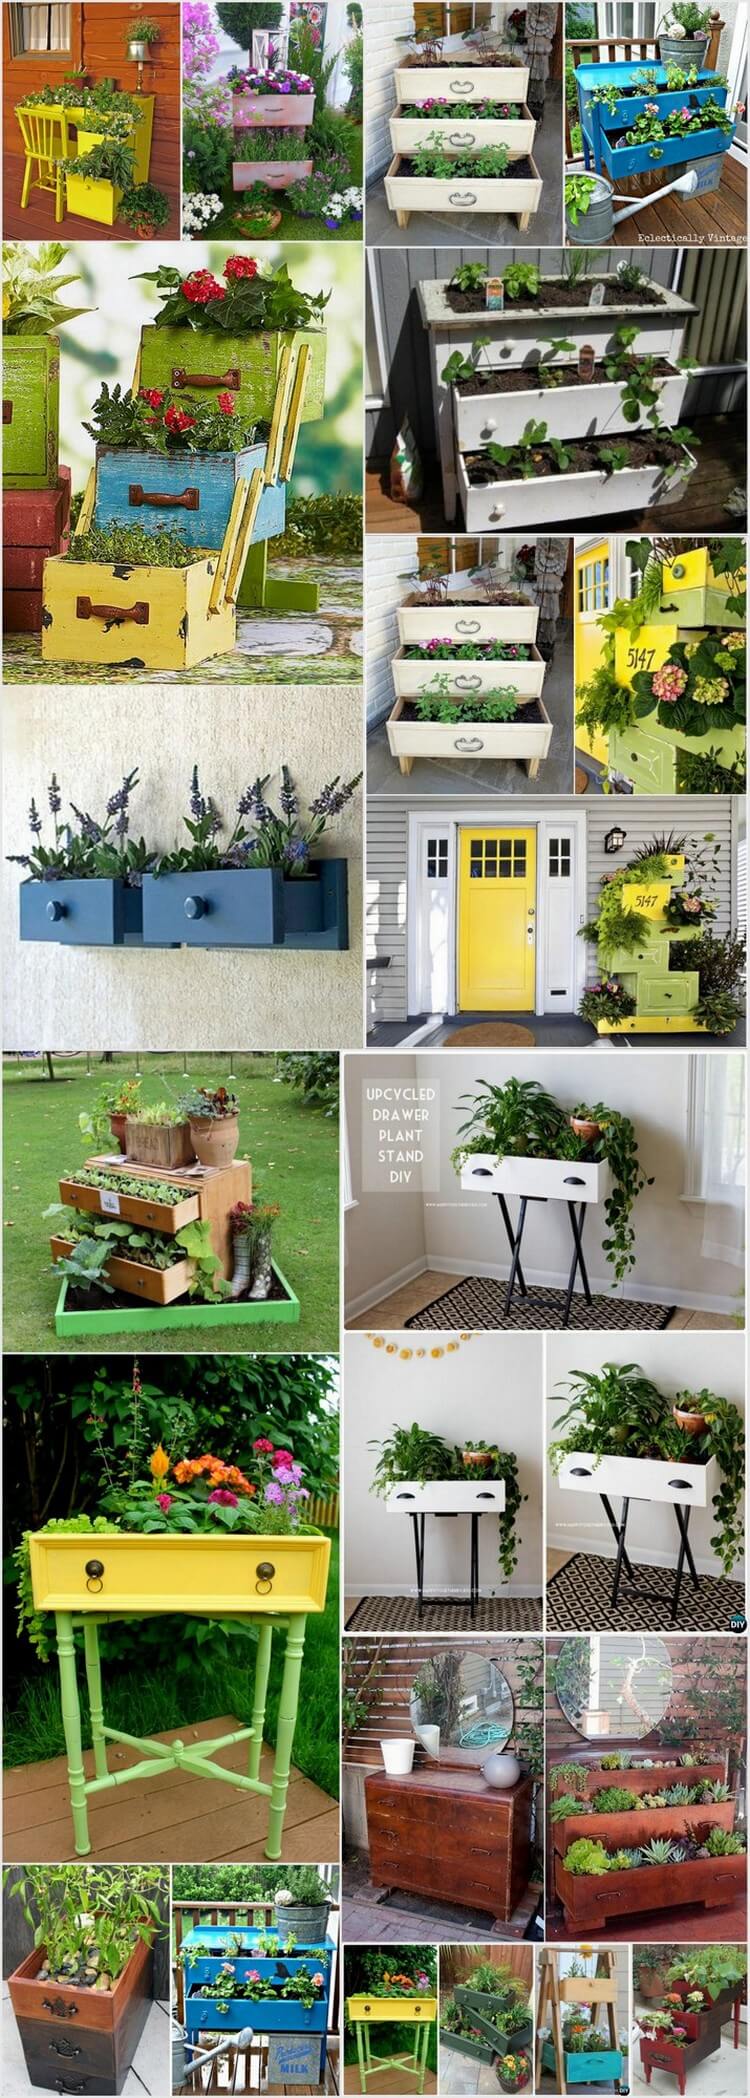 Creative Ways to Turn old Drawers into Planters